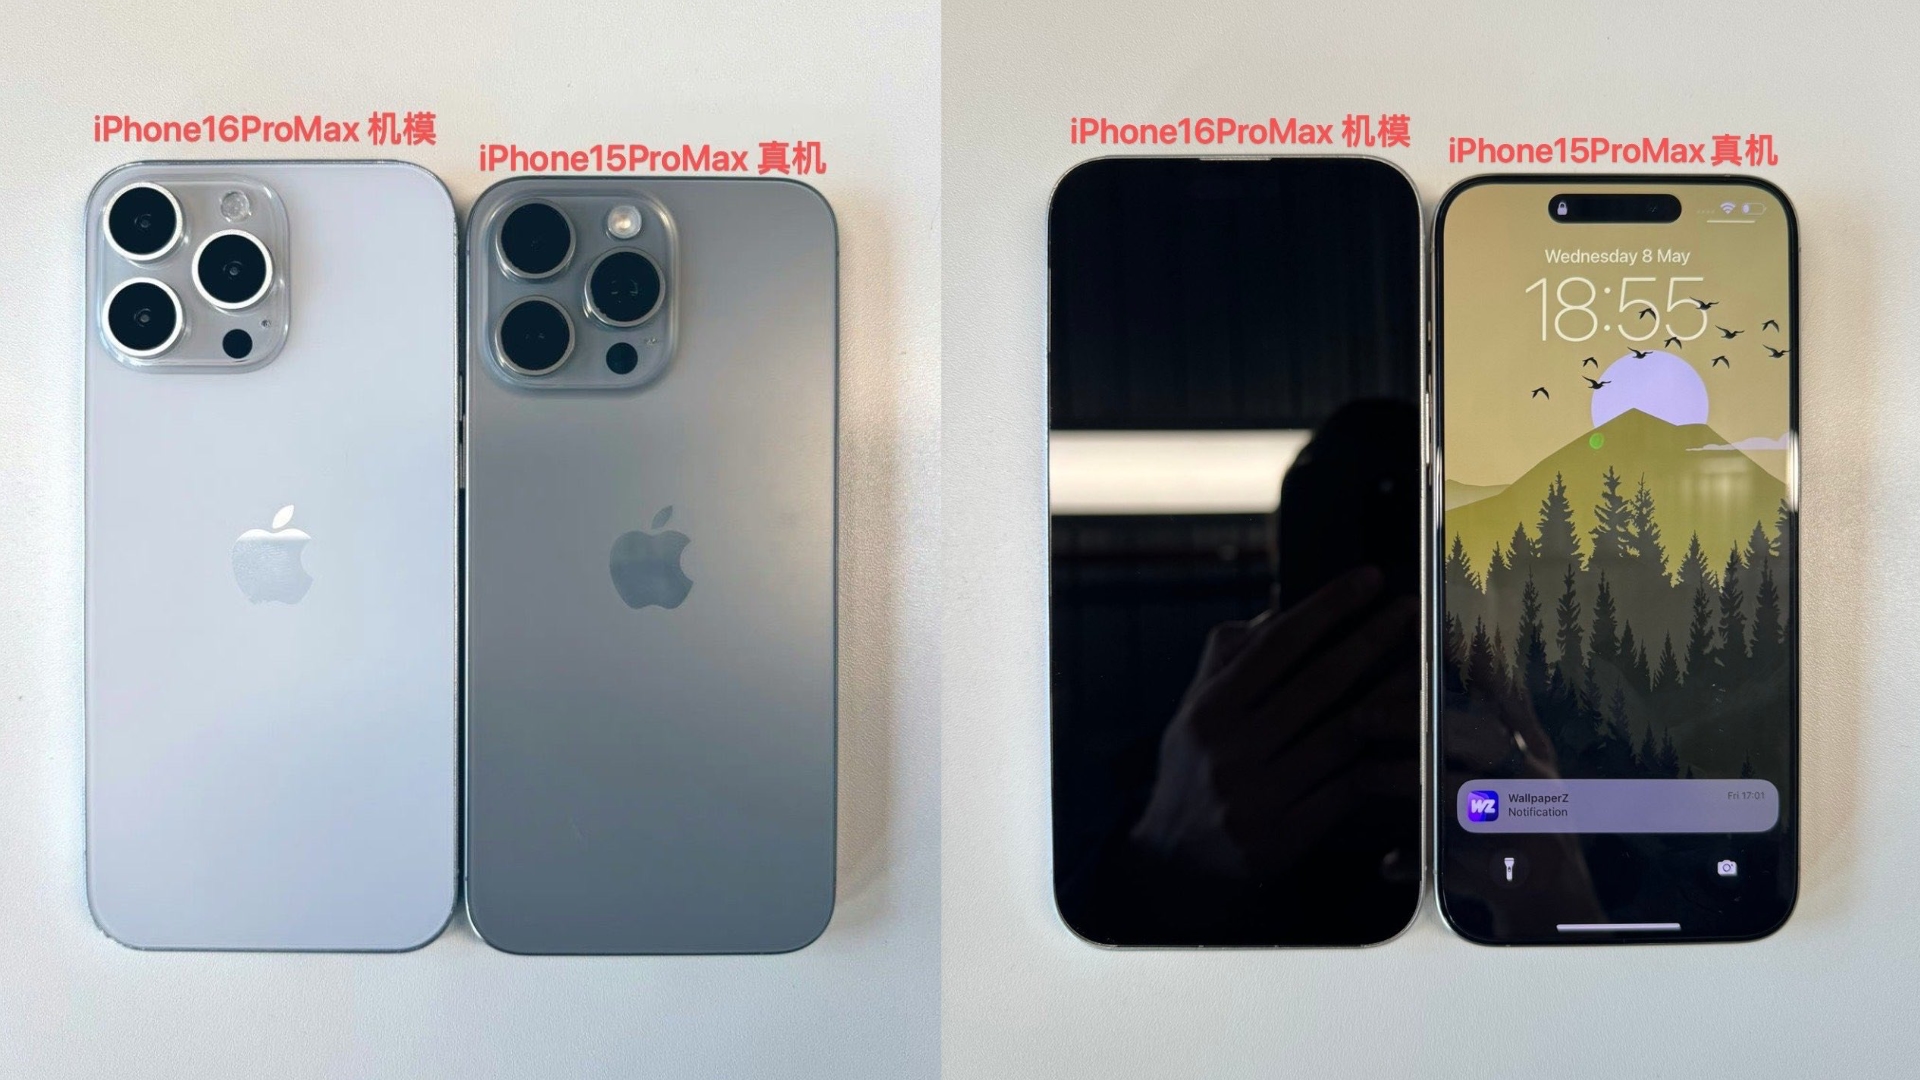 iPhone 16 Pro Max Looks This Much Bigger Beside iPhone 15 Pro Max